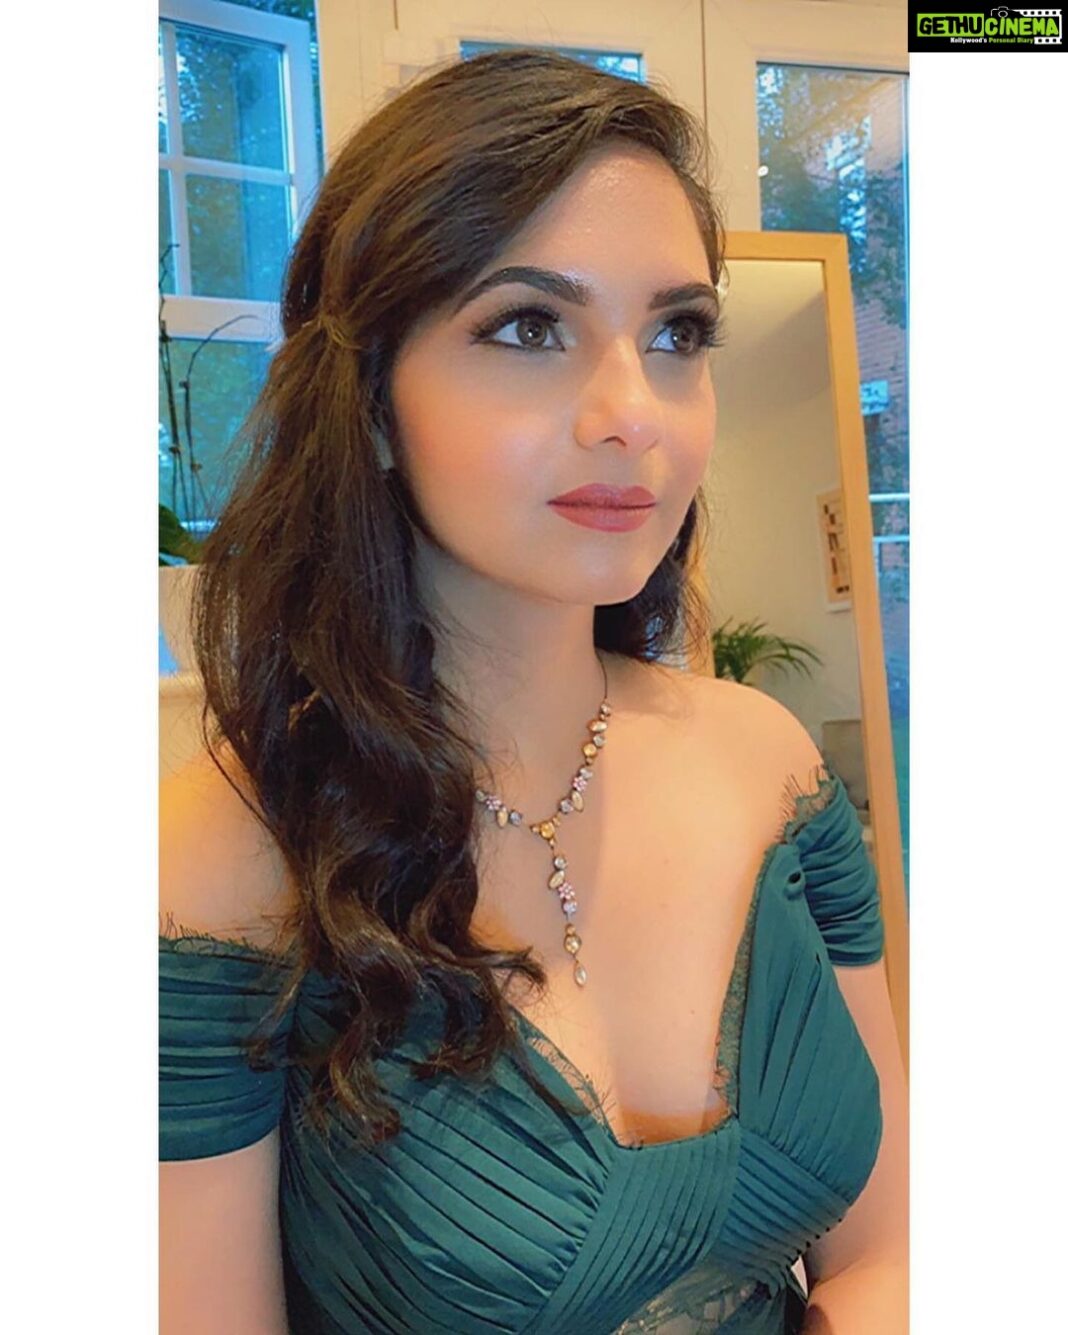 Ashwathy Warrier Instagram - A beautiful bridesmaid look created by @mytakeonmakeup . Absolutely love this soft glowing look she has created! It is so elegant and gorgeous 💕 #photography #shoot #actor #model #london #UK #india #soft #glowing #makeup #green #bridesmaids #brides #bridesmaid #eveninng #cocktails #simple #elegant #makeuplooks #makeuptutorial #makeupwedding #dress #dresses #blush jewellery #hairstyles #hair #chokerstatementpiece #statementjewelry